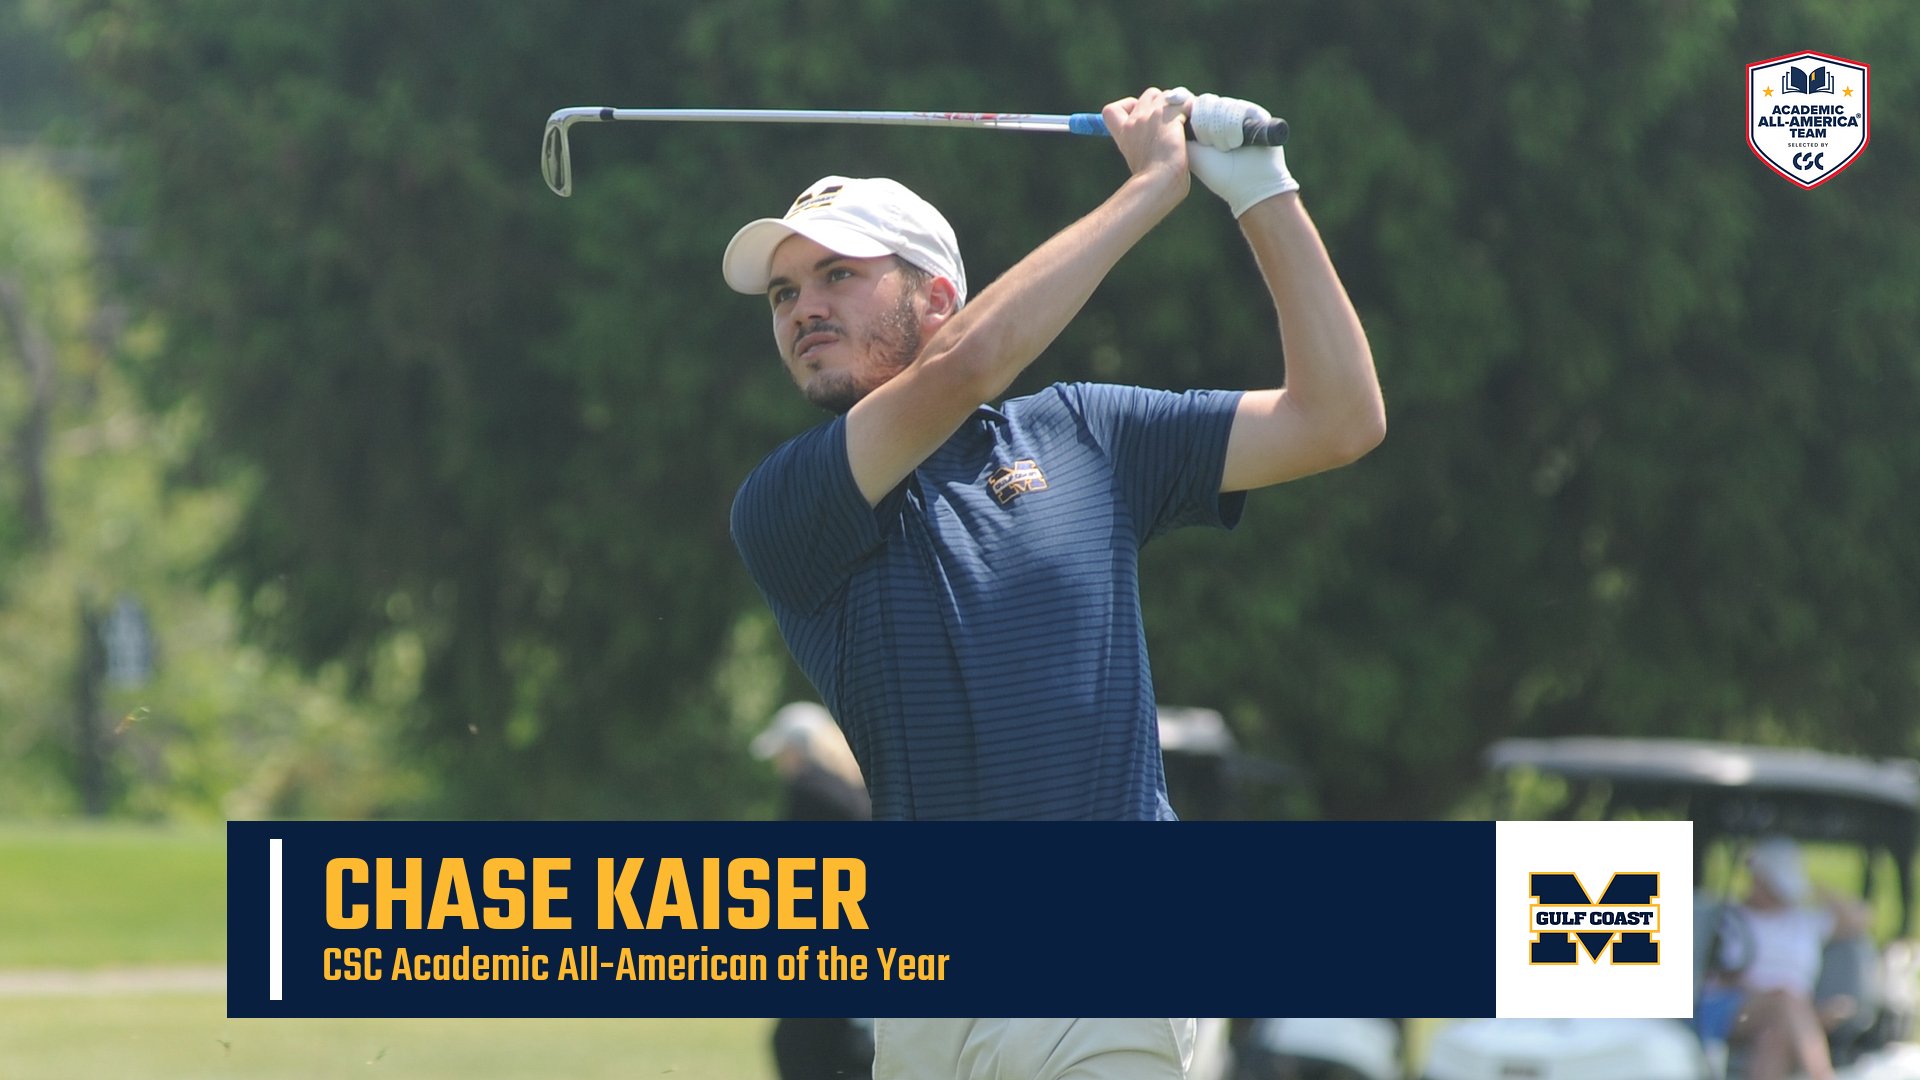 Kaiser wins Academic All-American of the Year